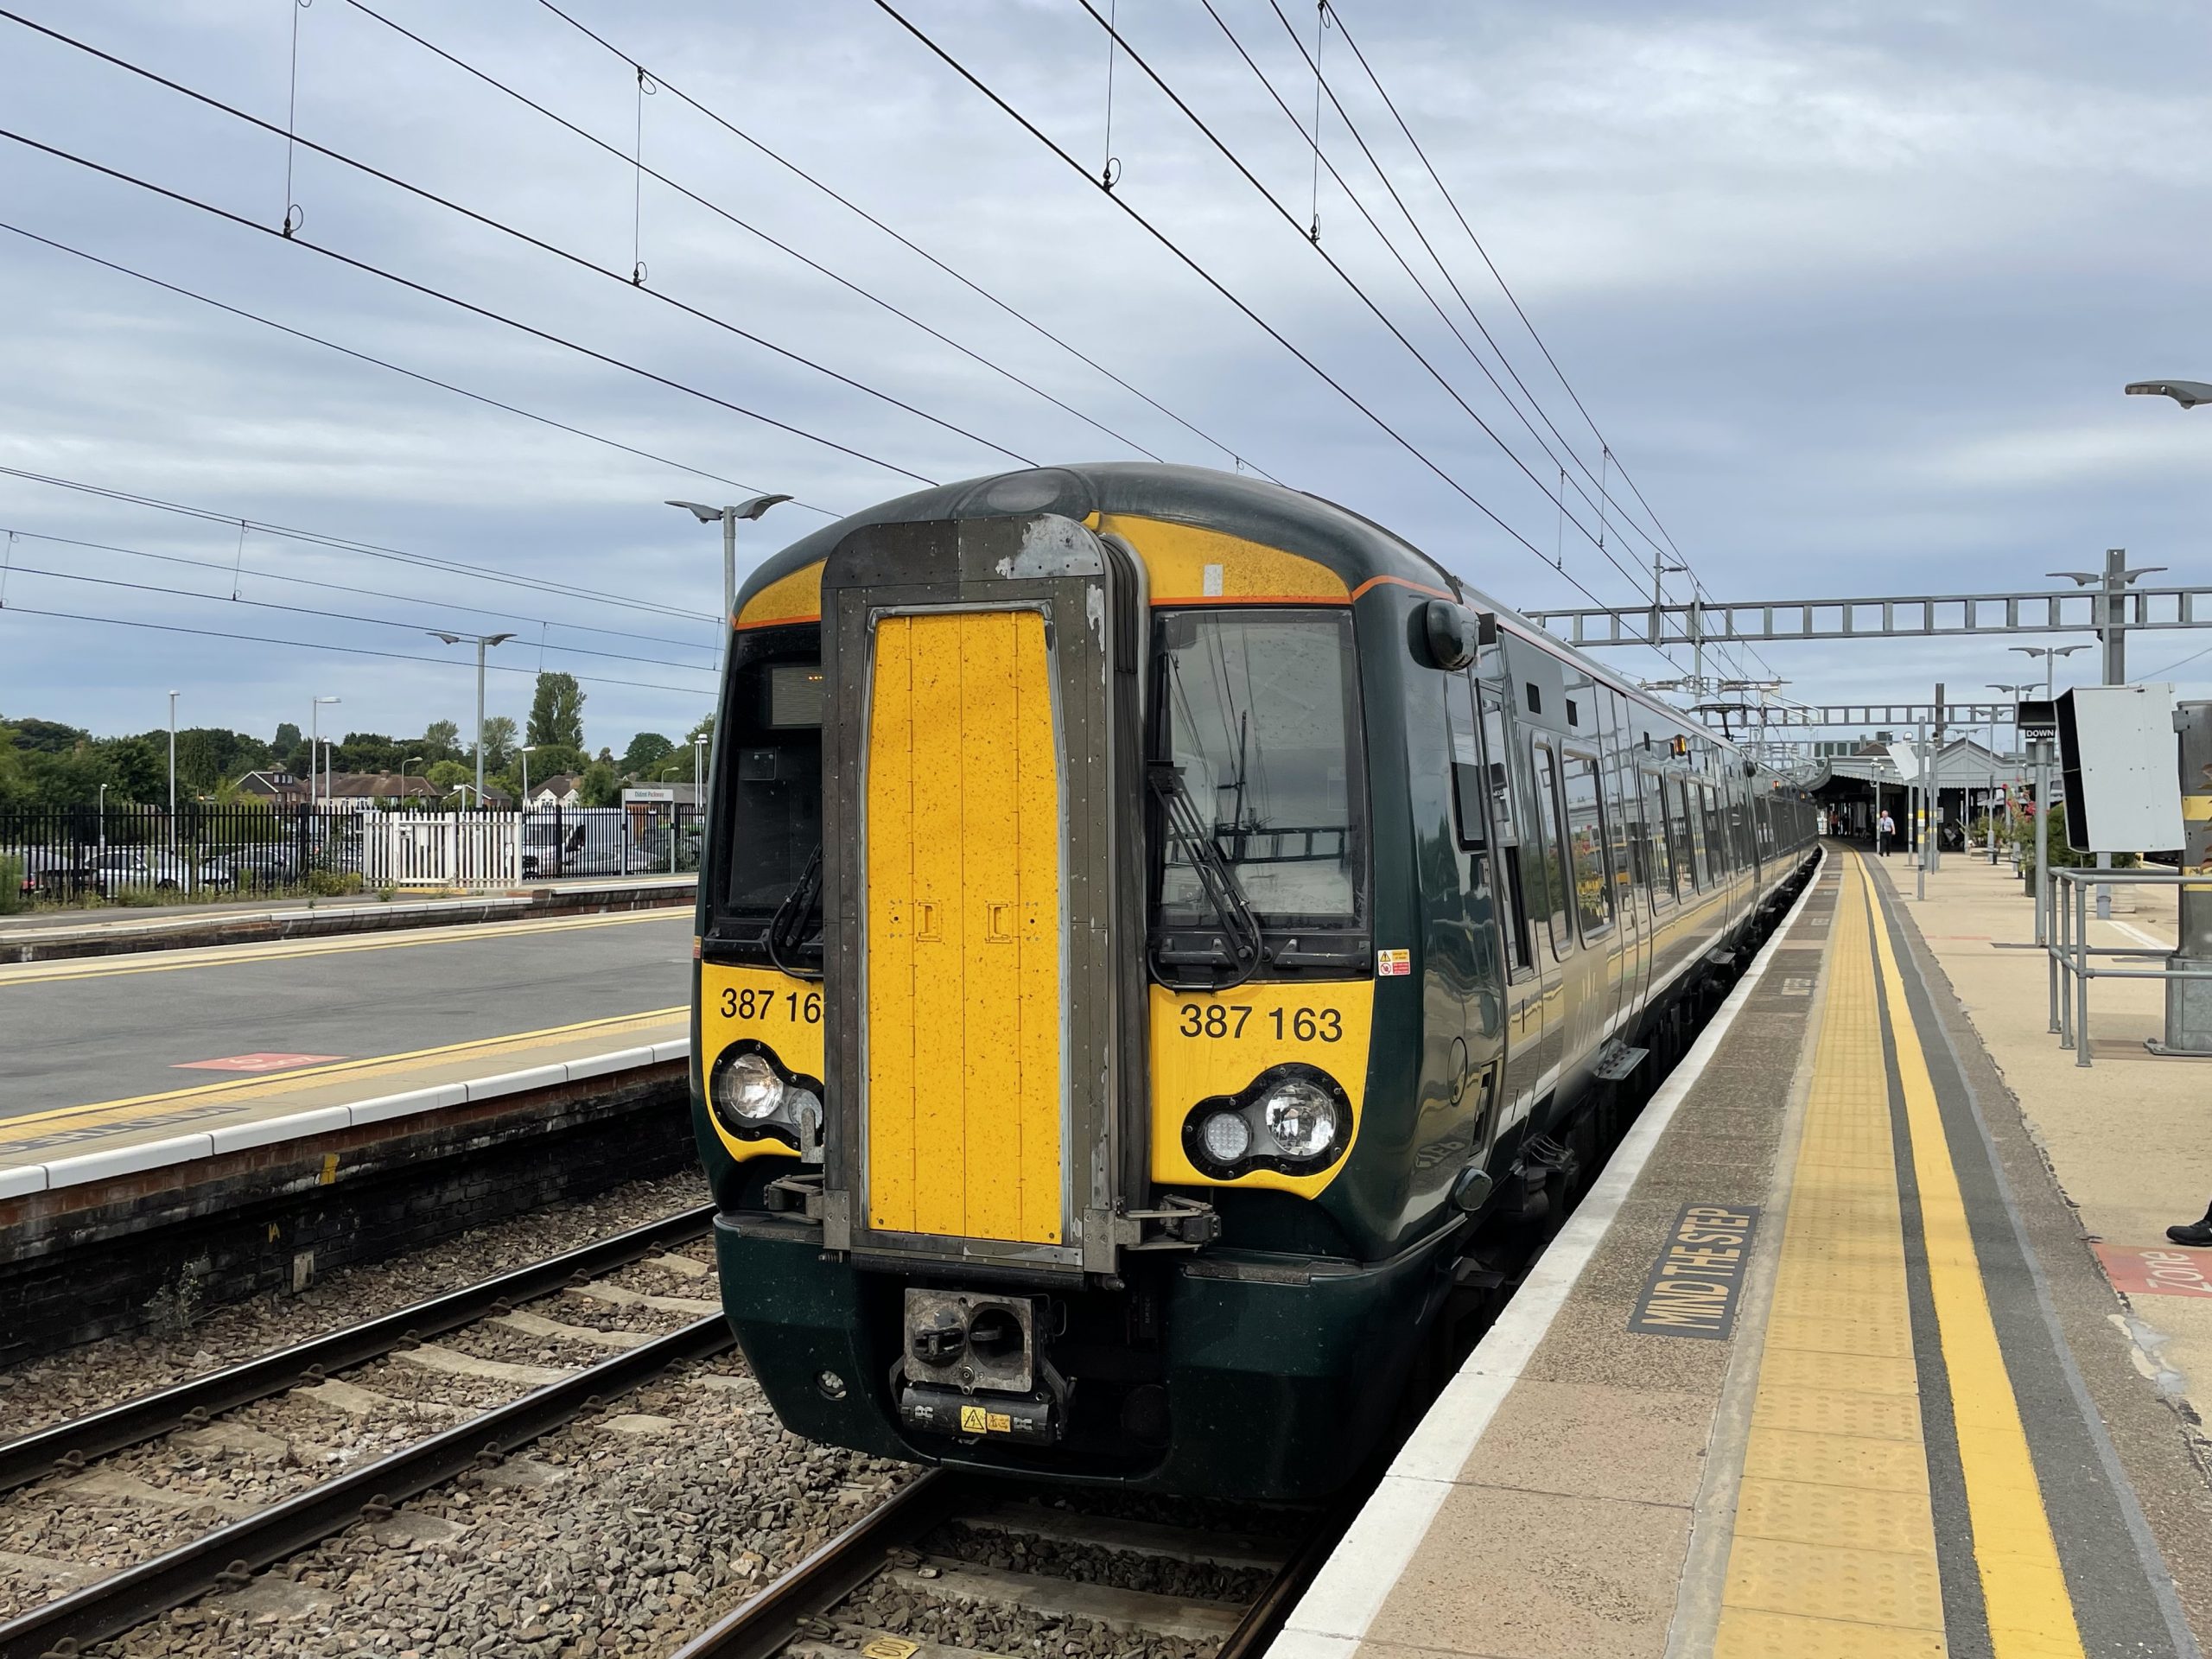 Bombardier Class 387 units 387163 ahead of 387144 forming the 2P42 11:08 service to London Paddington : Image credit - Peter Hughes.